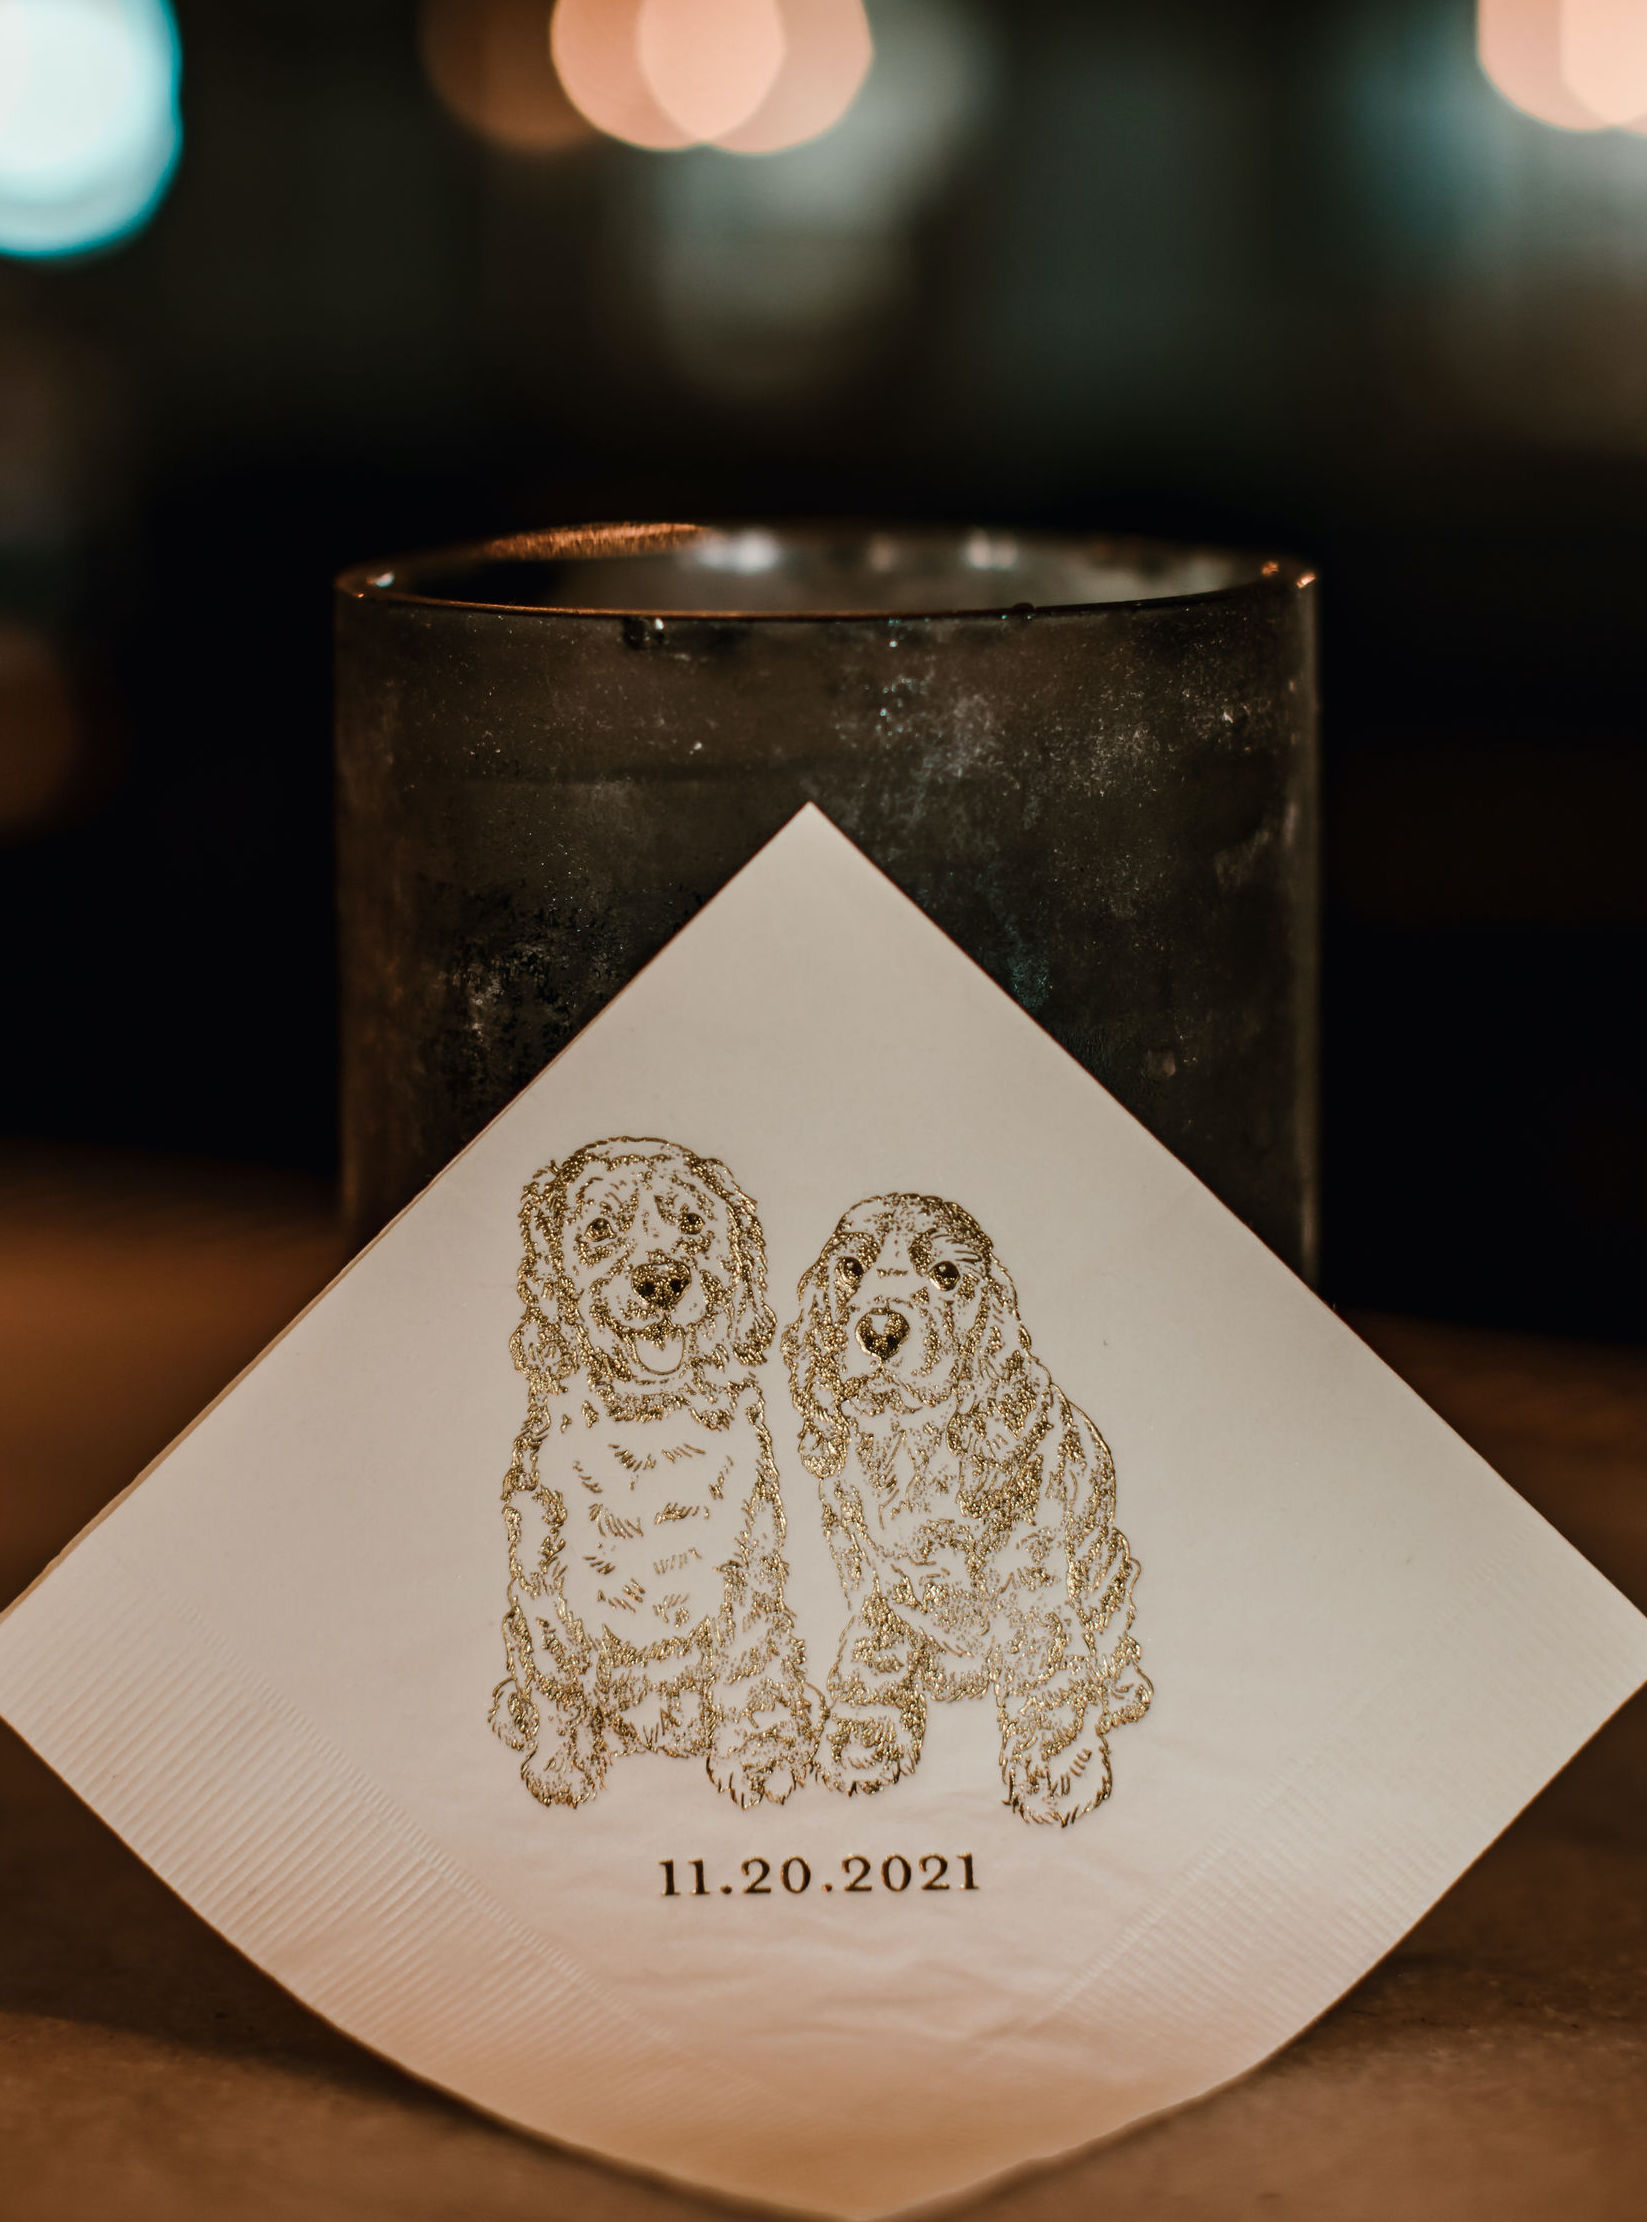 The bride and groom's dogs are etched with gold on napkins at their wedding reception at The Astorian in Houston, TX.